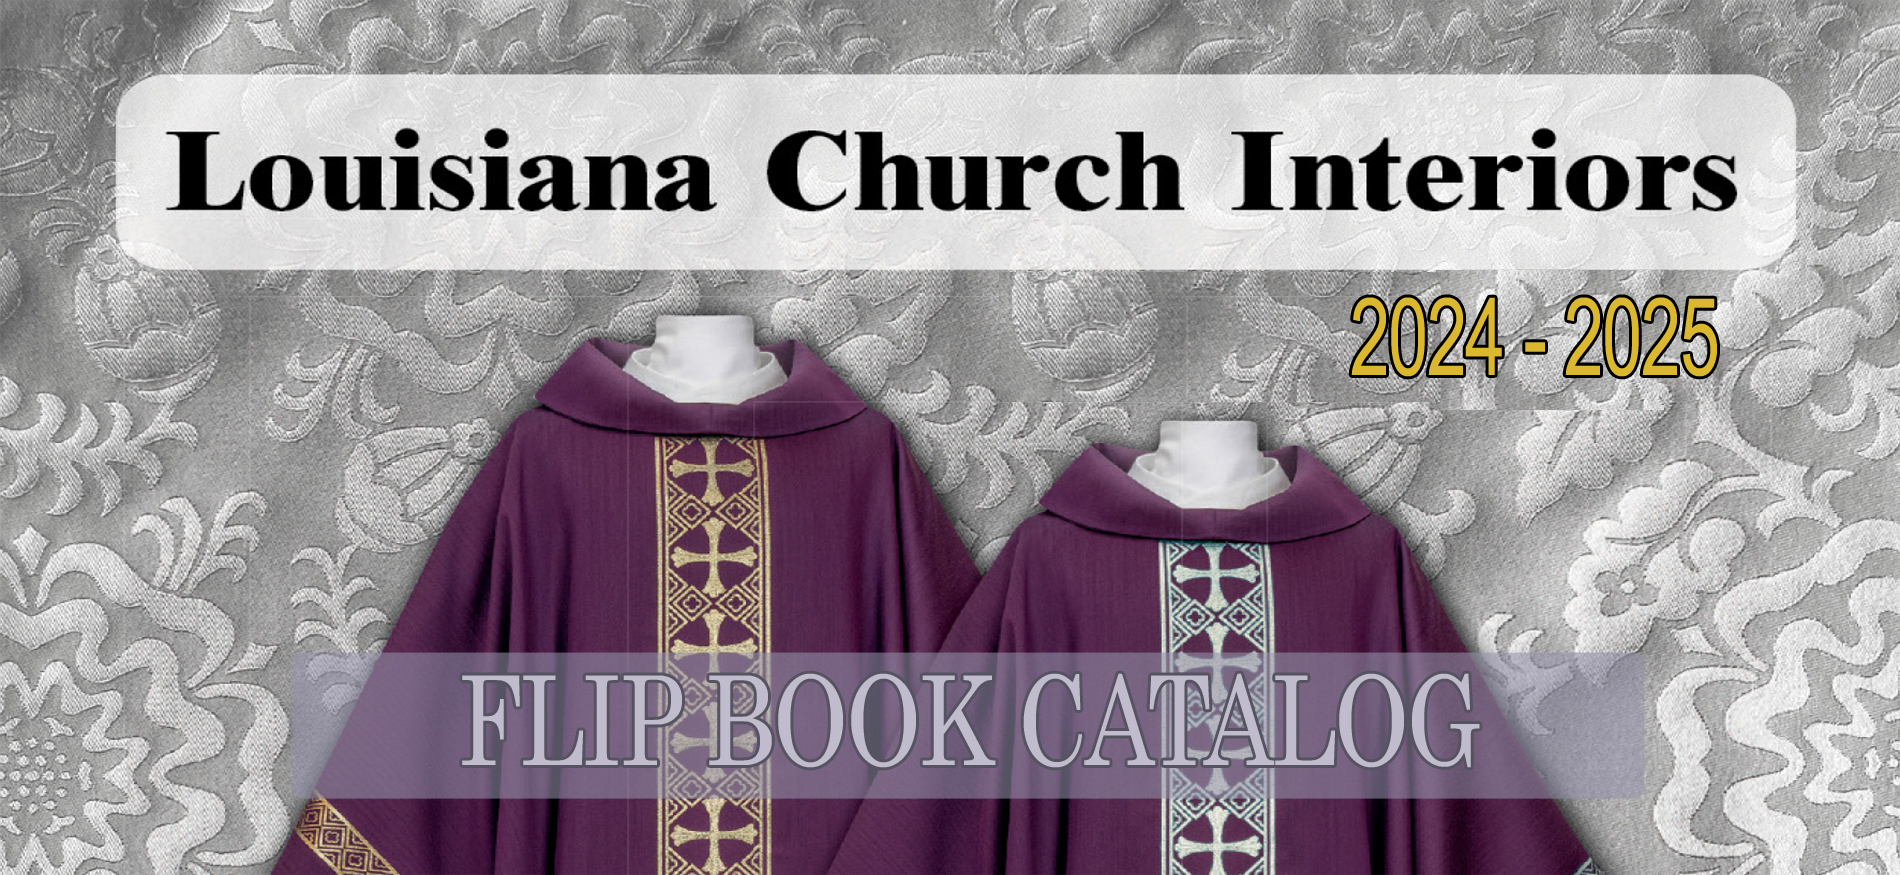 CLICK HERE for Our Flip Book Catalog